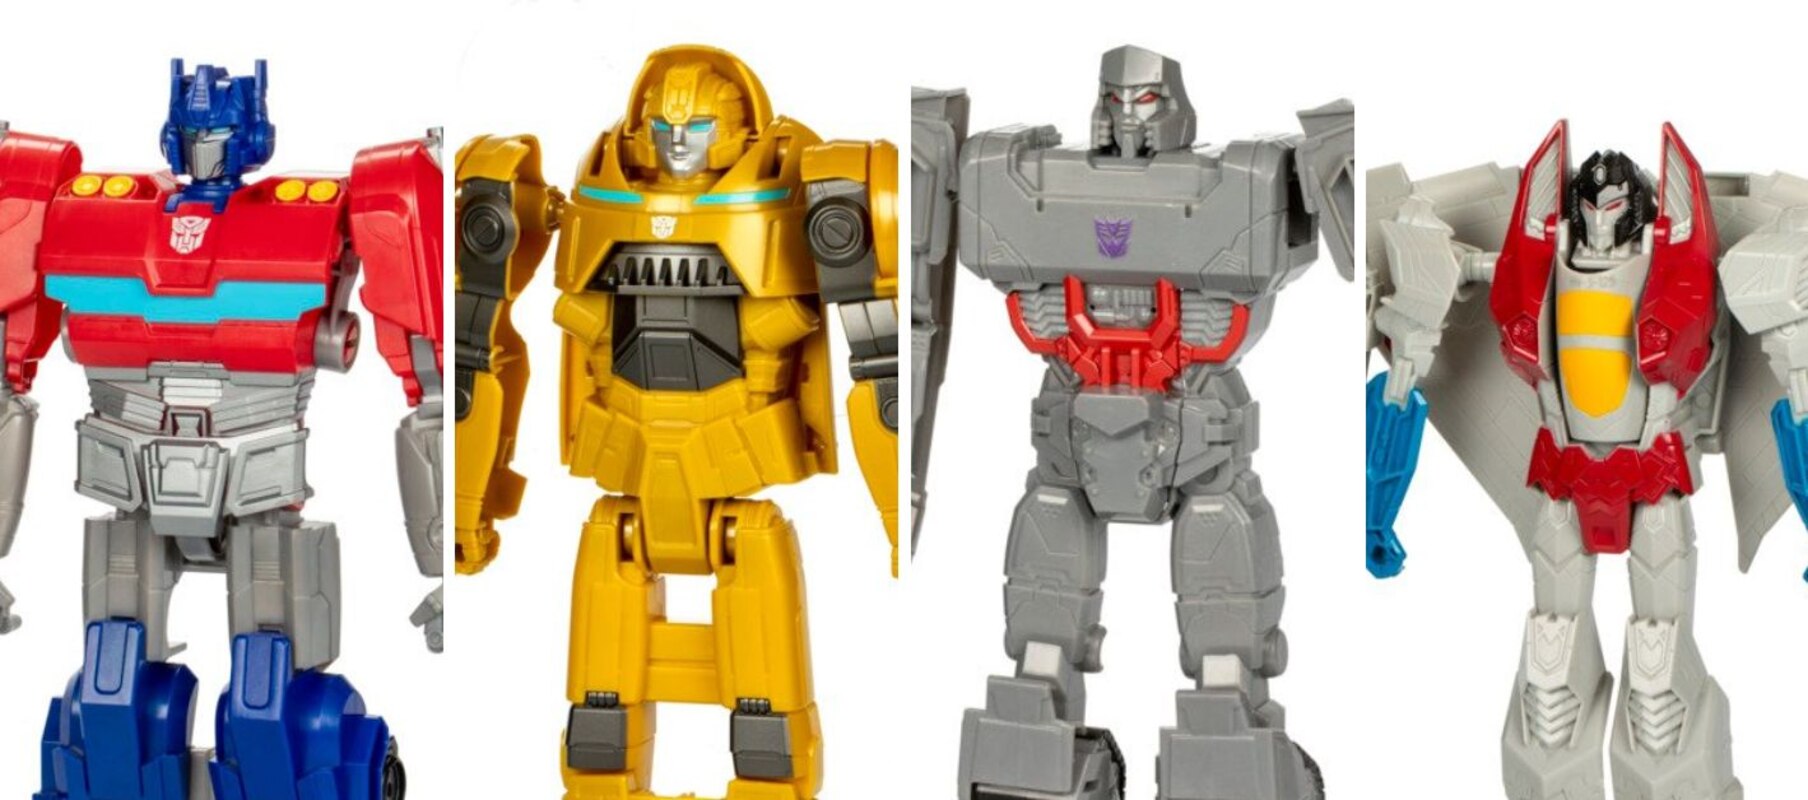  Transformers ONE Titan Changers Official Images - Rise Of The Authentics!